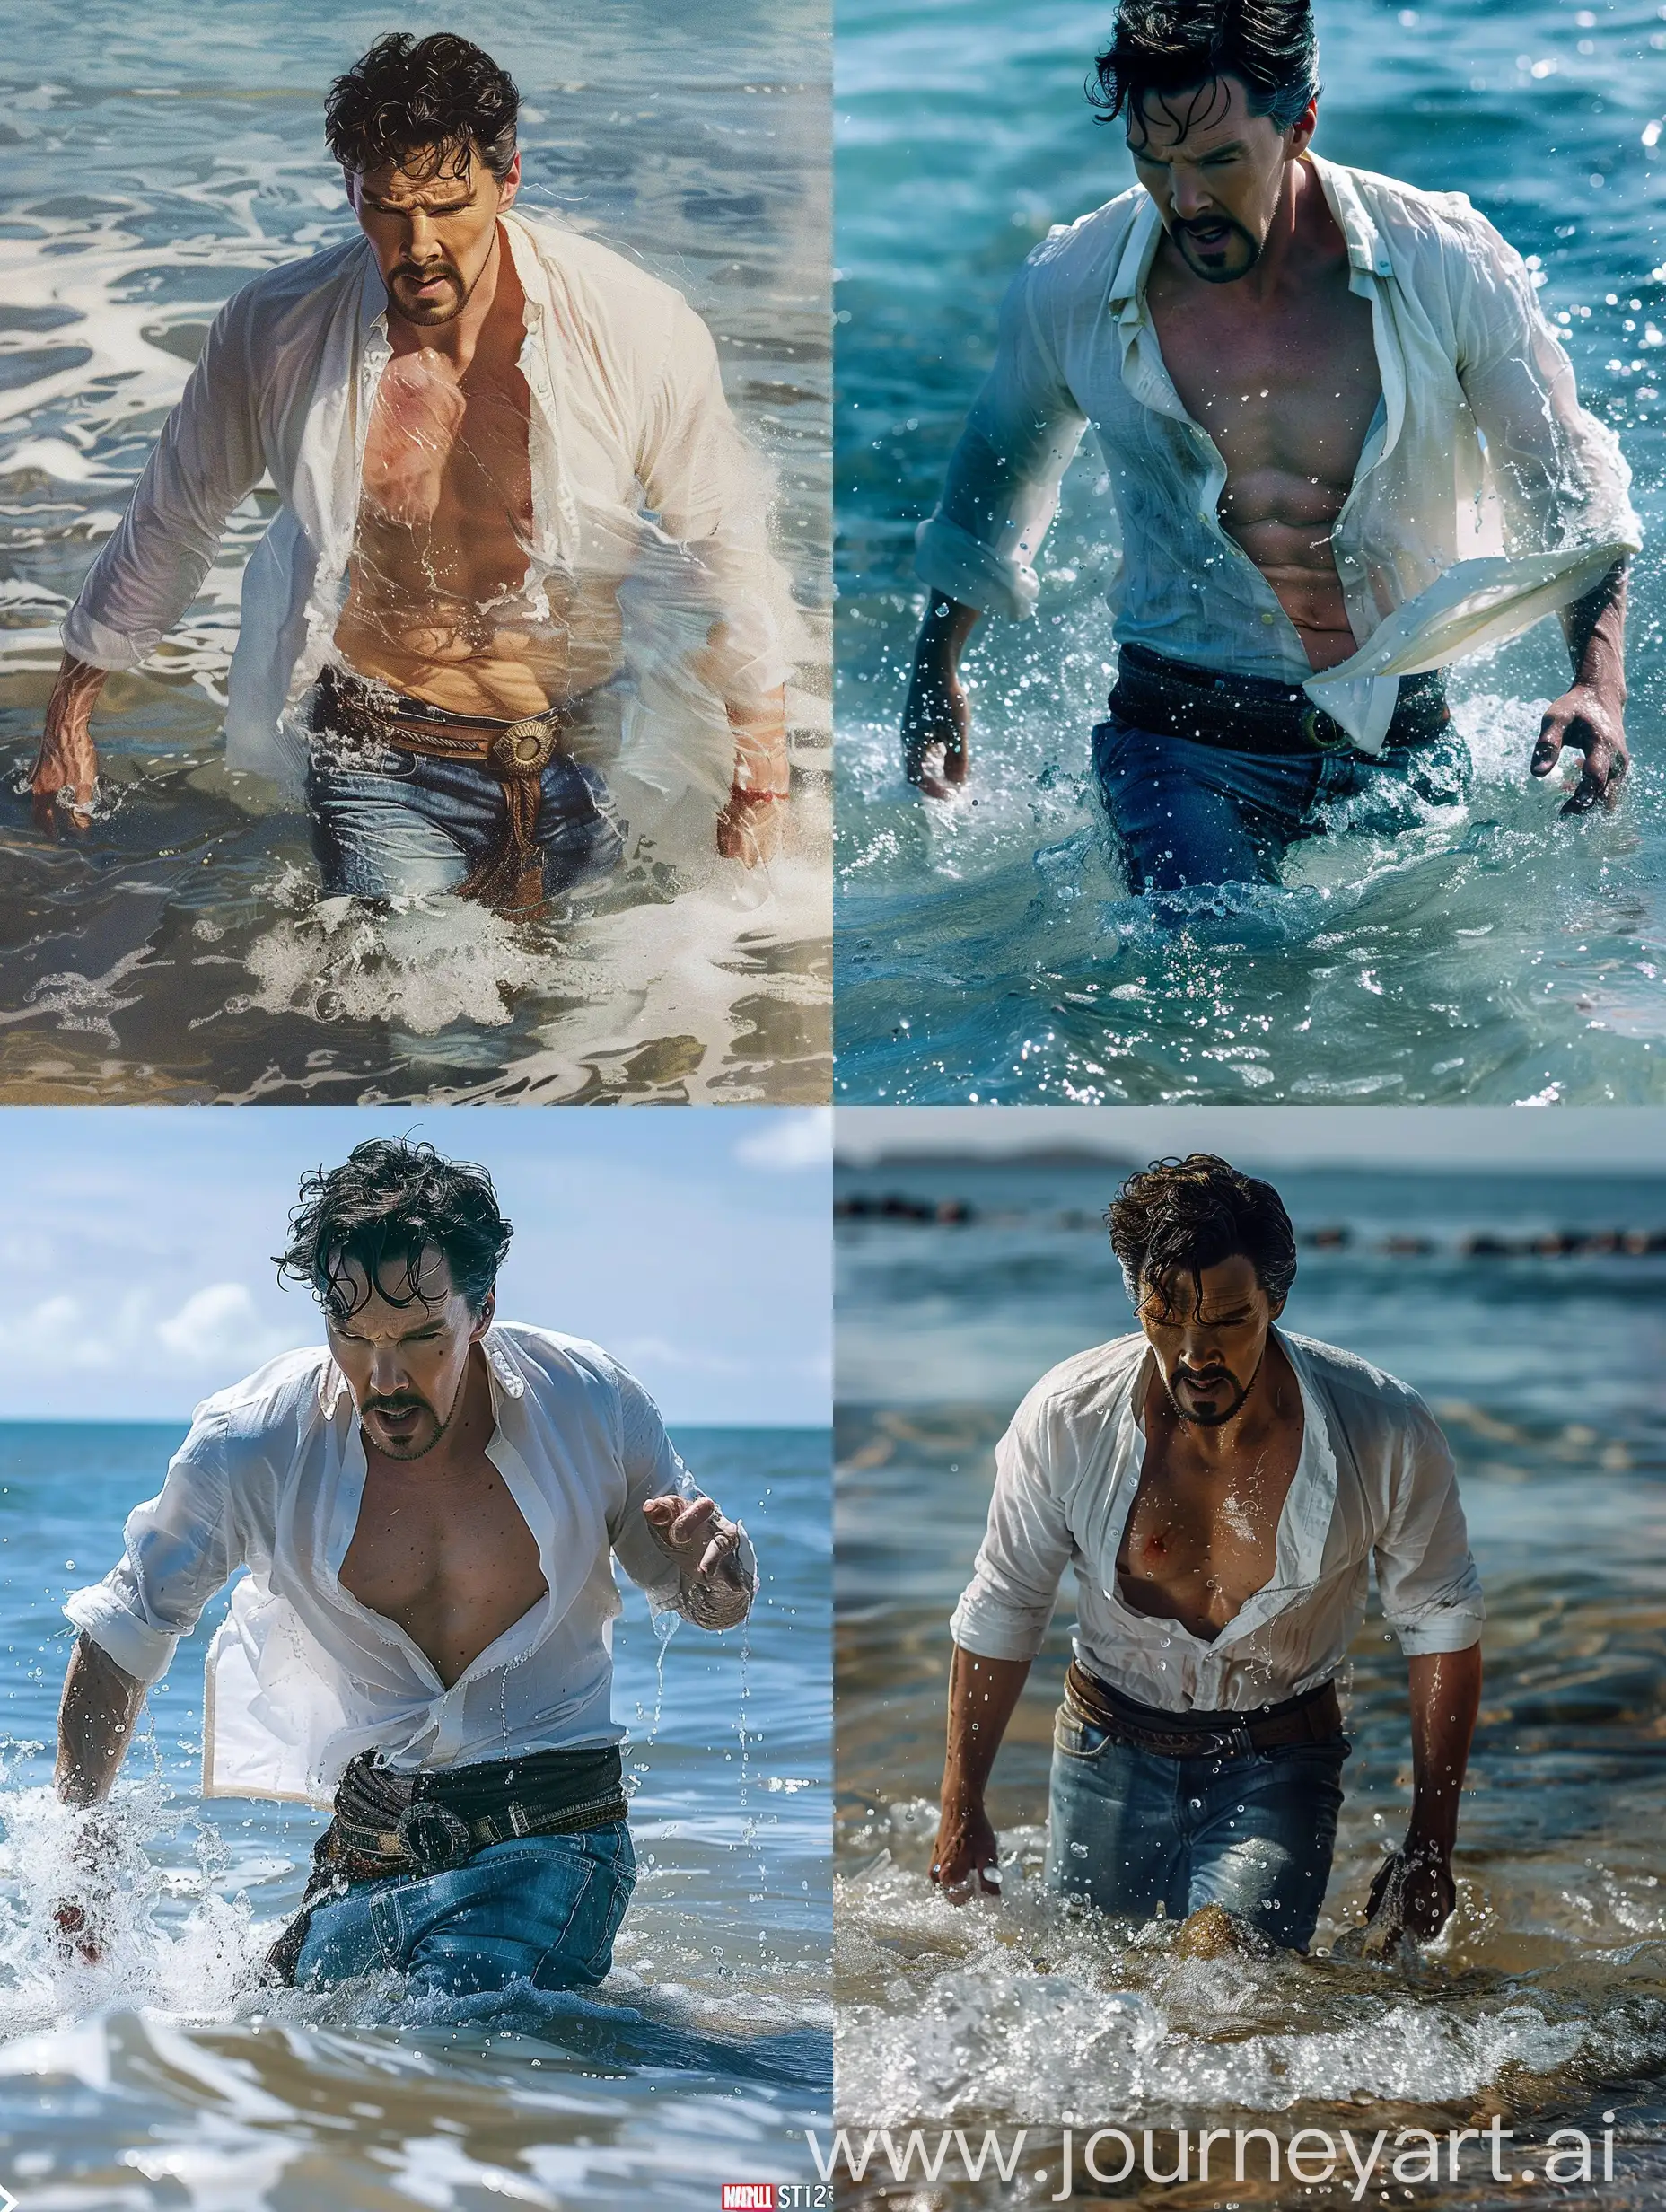 Doctor Strange getting out of the sea, wearing a white shirt, exposing chest, and jean trousers. He is wet.